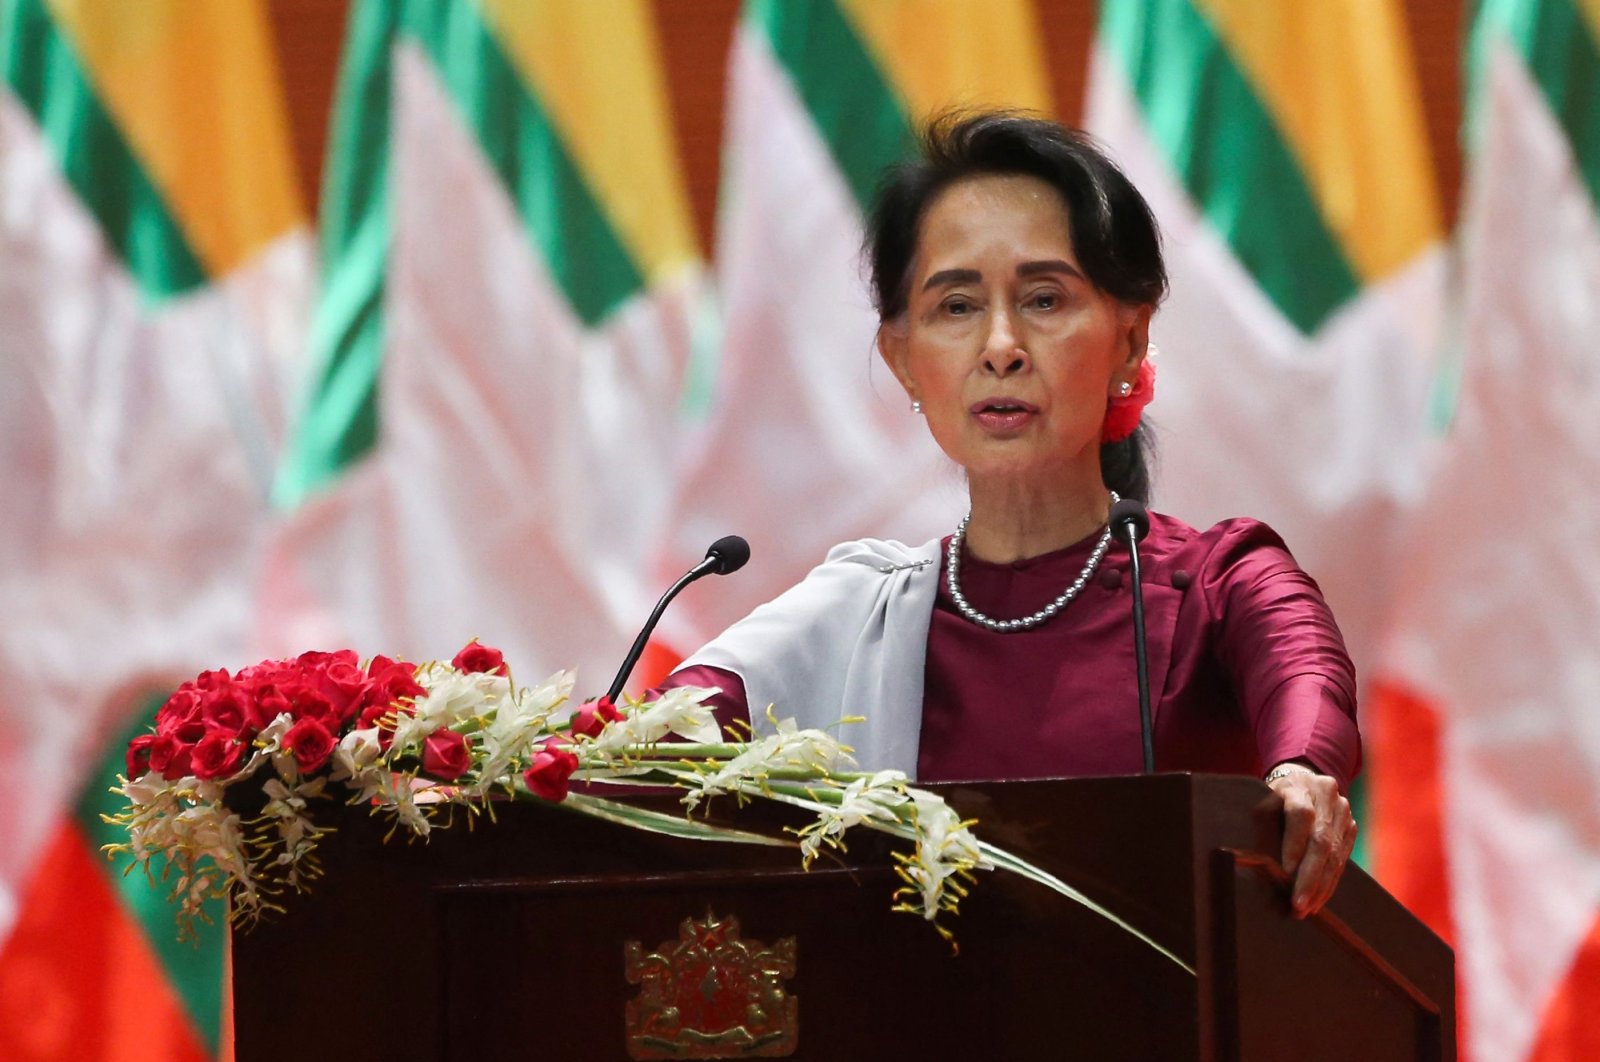 Ousted Myanmar leader Aung San Suu Kyi delivers a national address in Naypyidaw, Myanmar, Sept. 19, 2017. (AFP Photo)